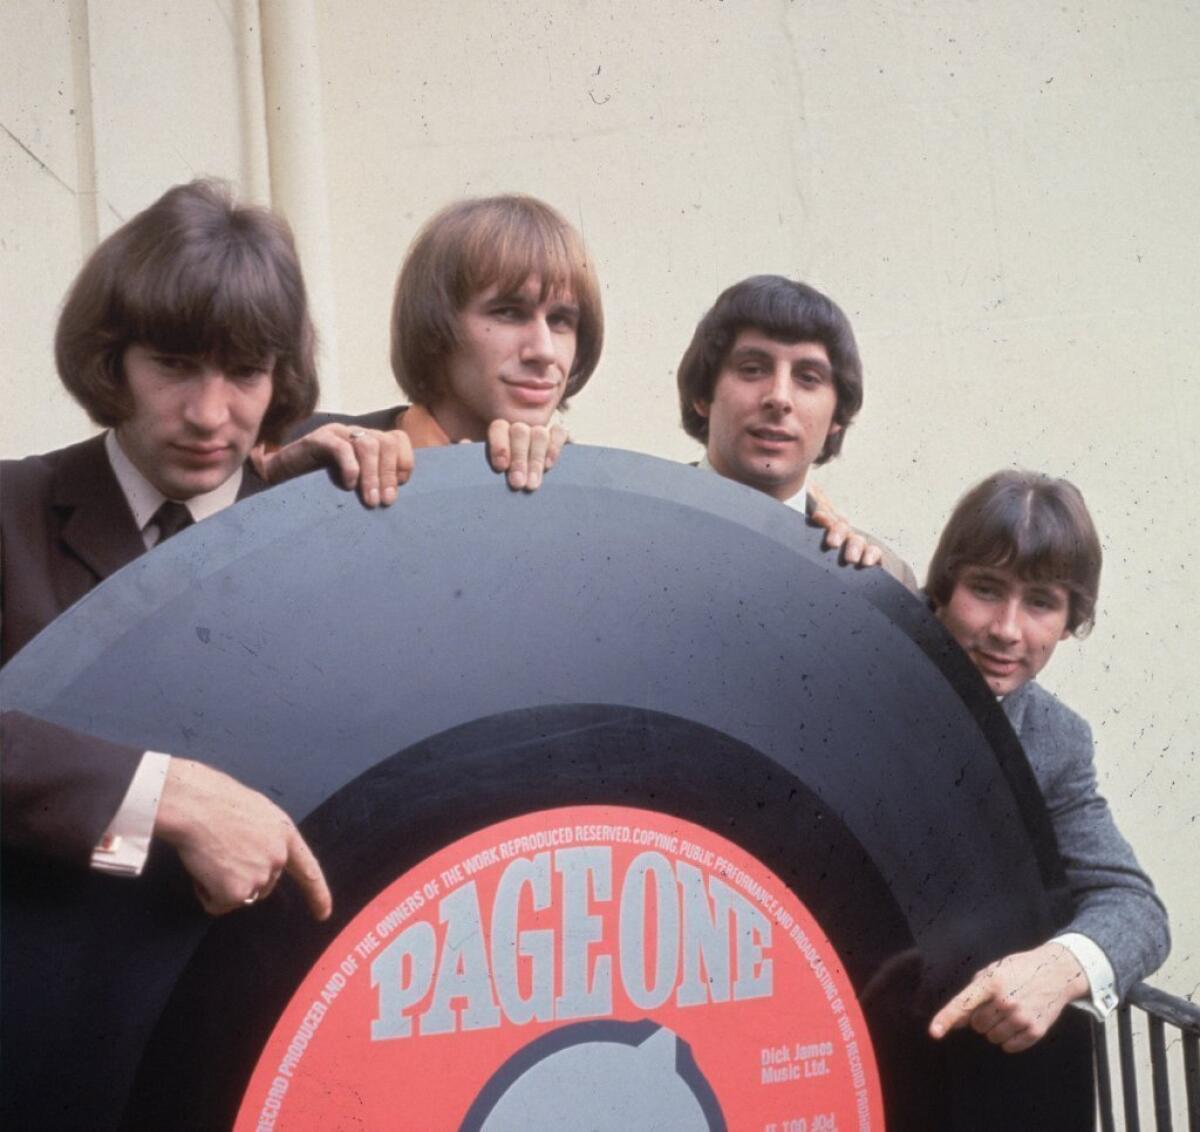 Reg Presley, far right, of the '60s band the Troggs, died Monday at age 71.